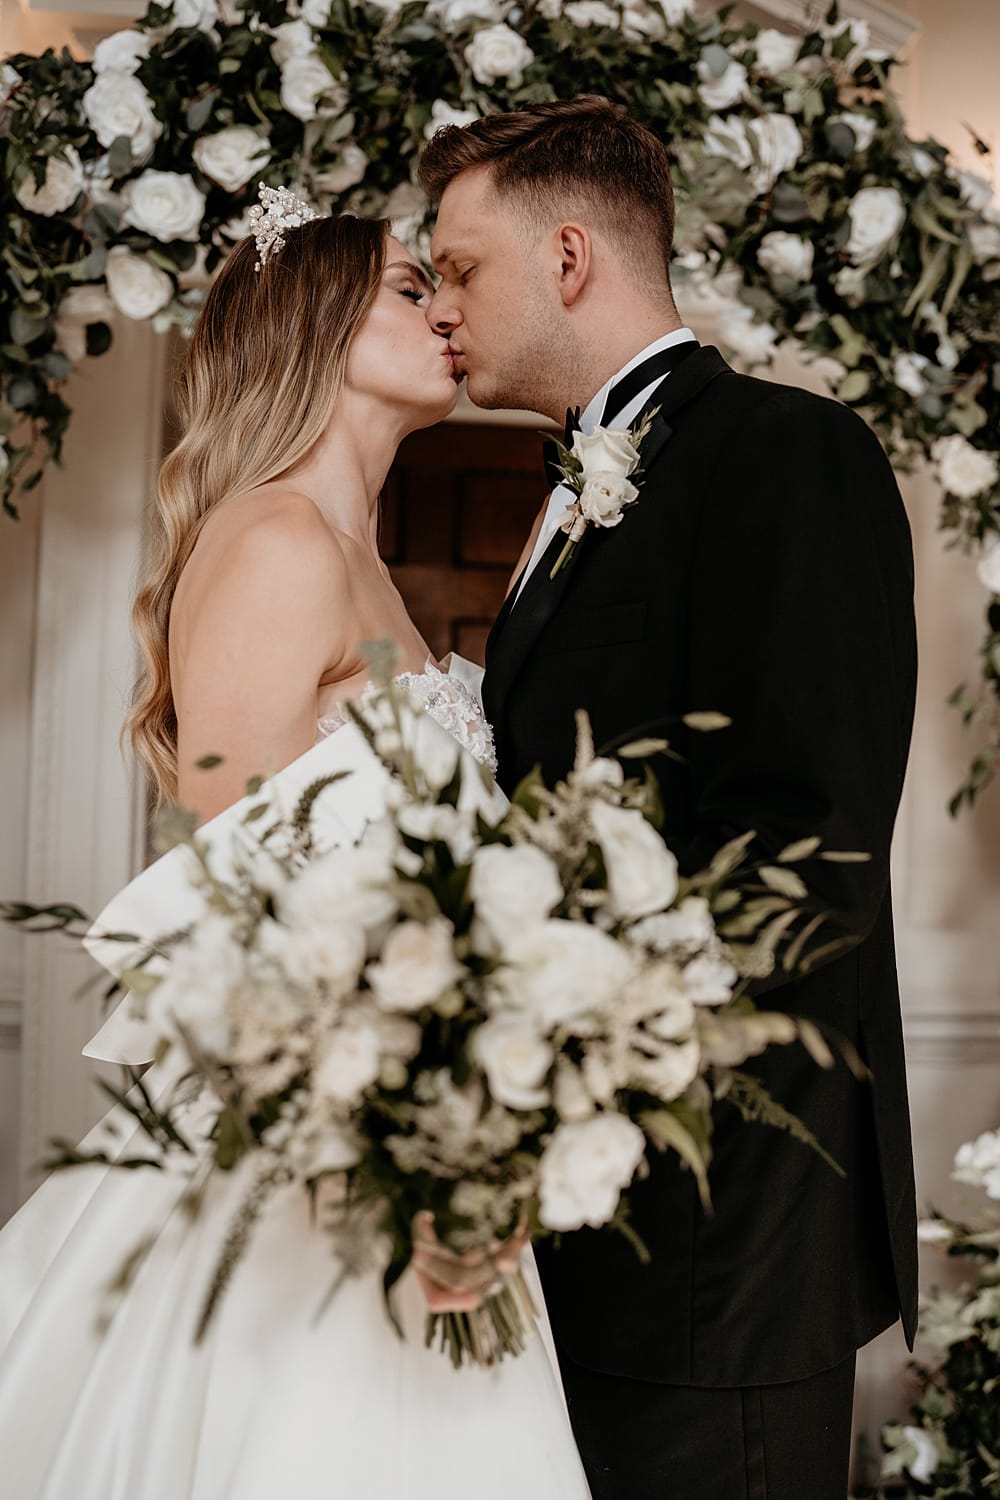 A CONTEMPORARY SHOOT IN AN 18TH CENTURY MANOR HOUSE